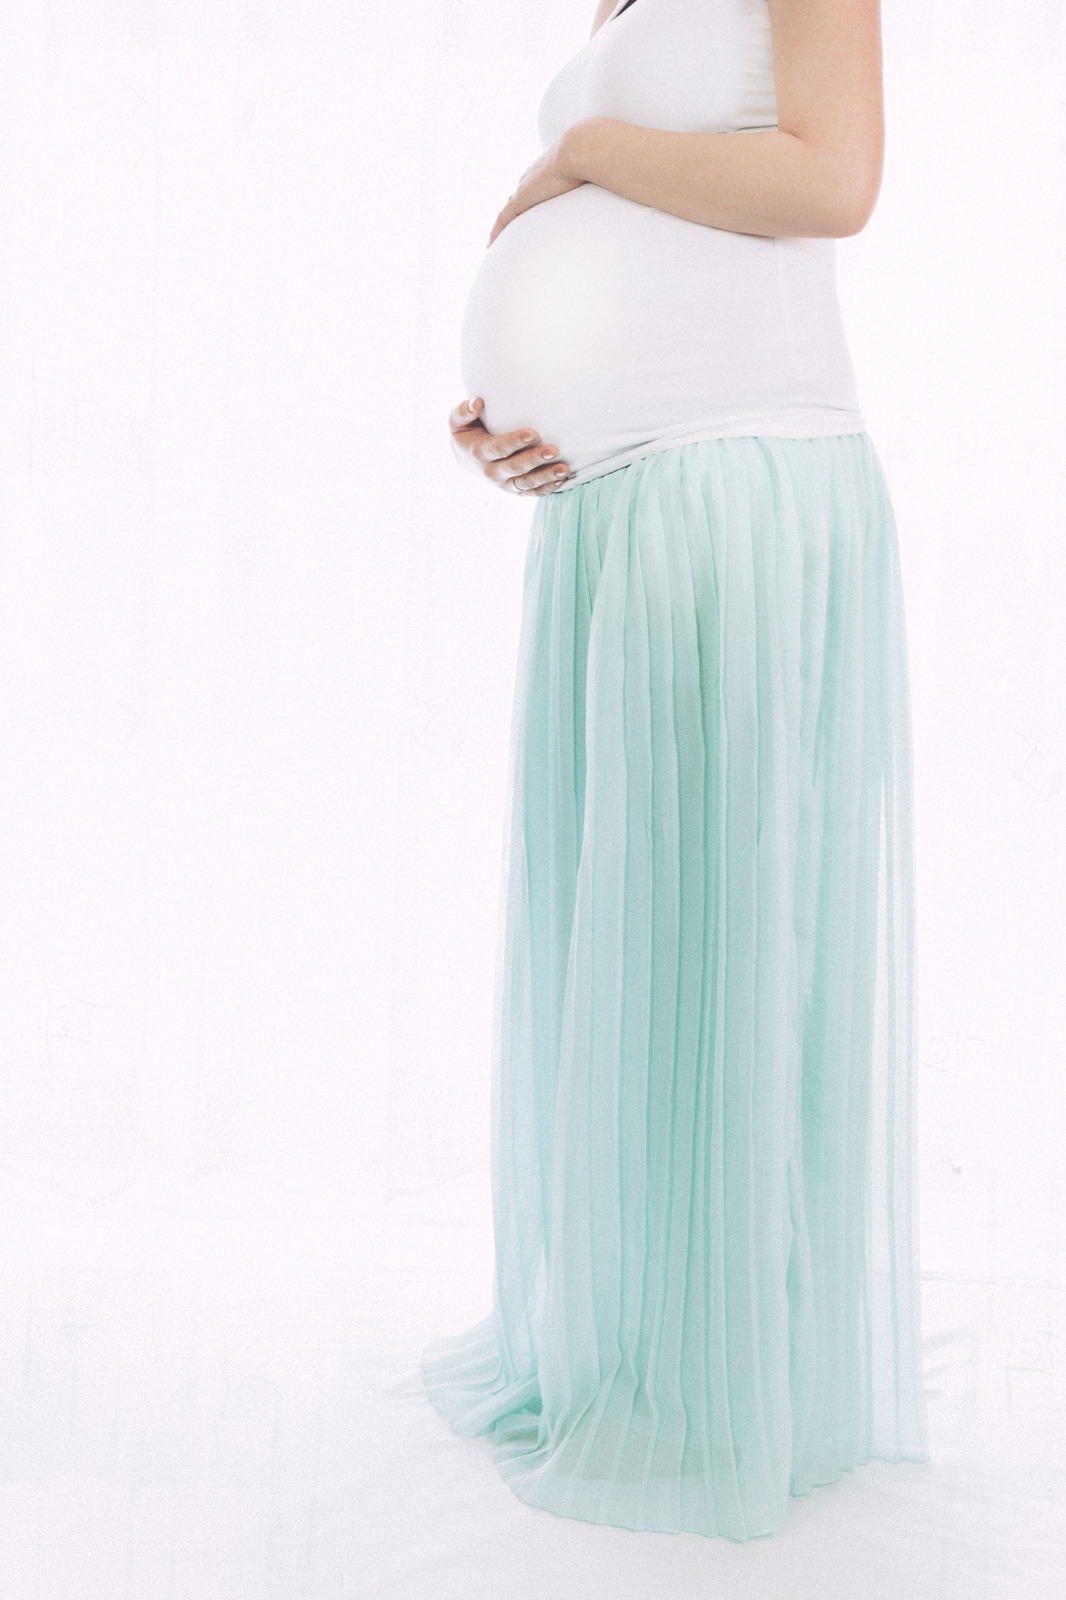 canva-pregnant-woman-standing-in-front-of-white-wall-madgx_gp5bw.jpg